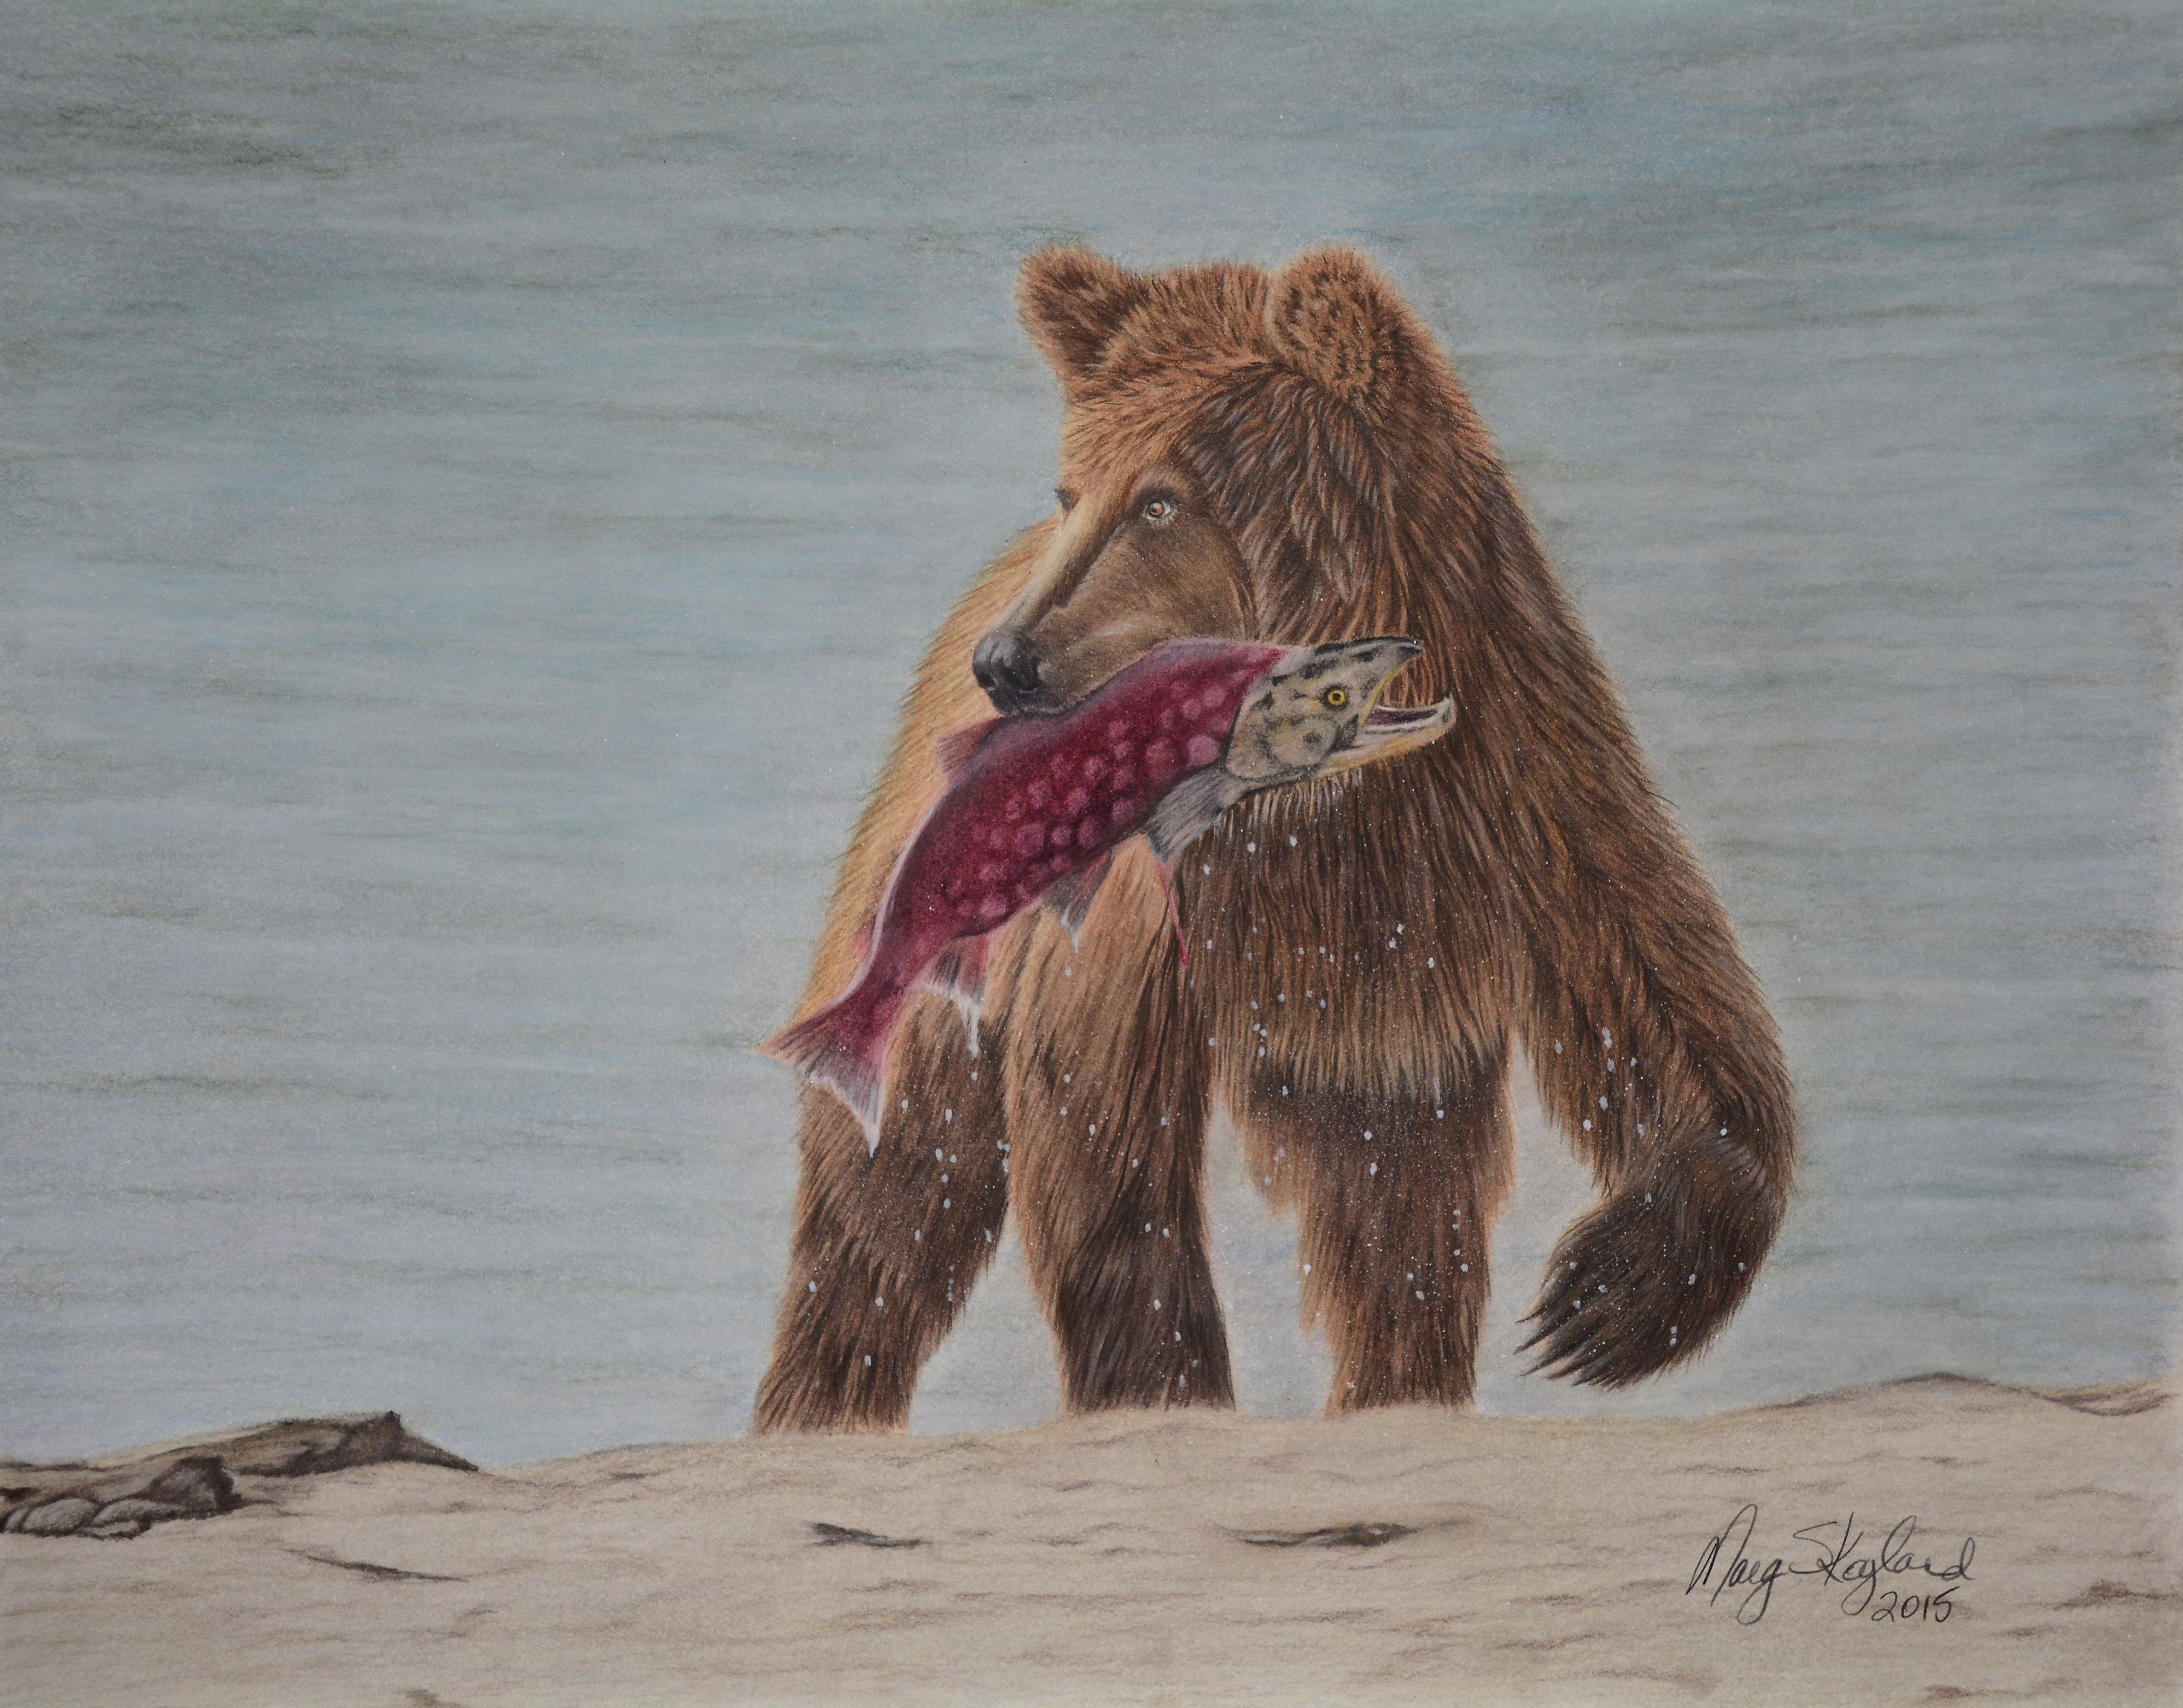 Grizzly Bear with Salmon